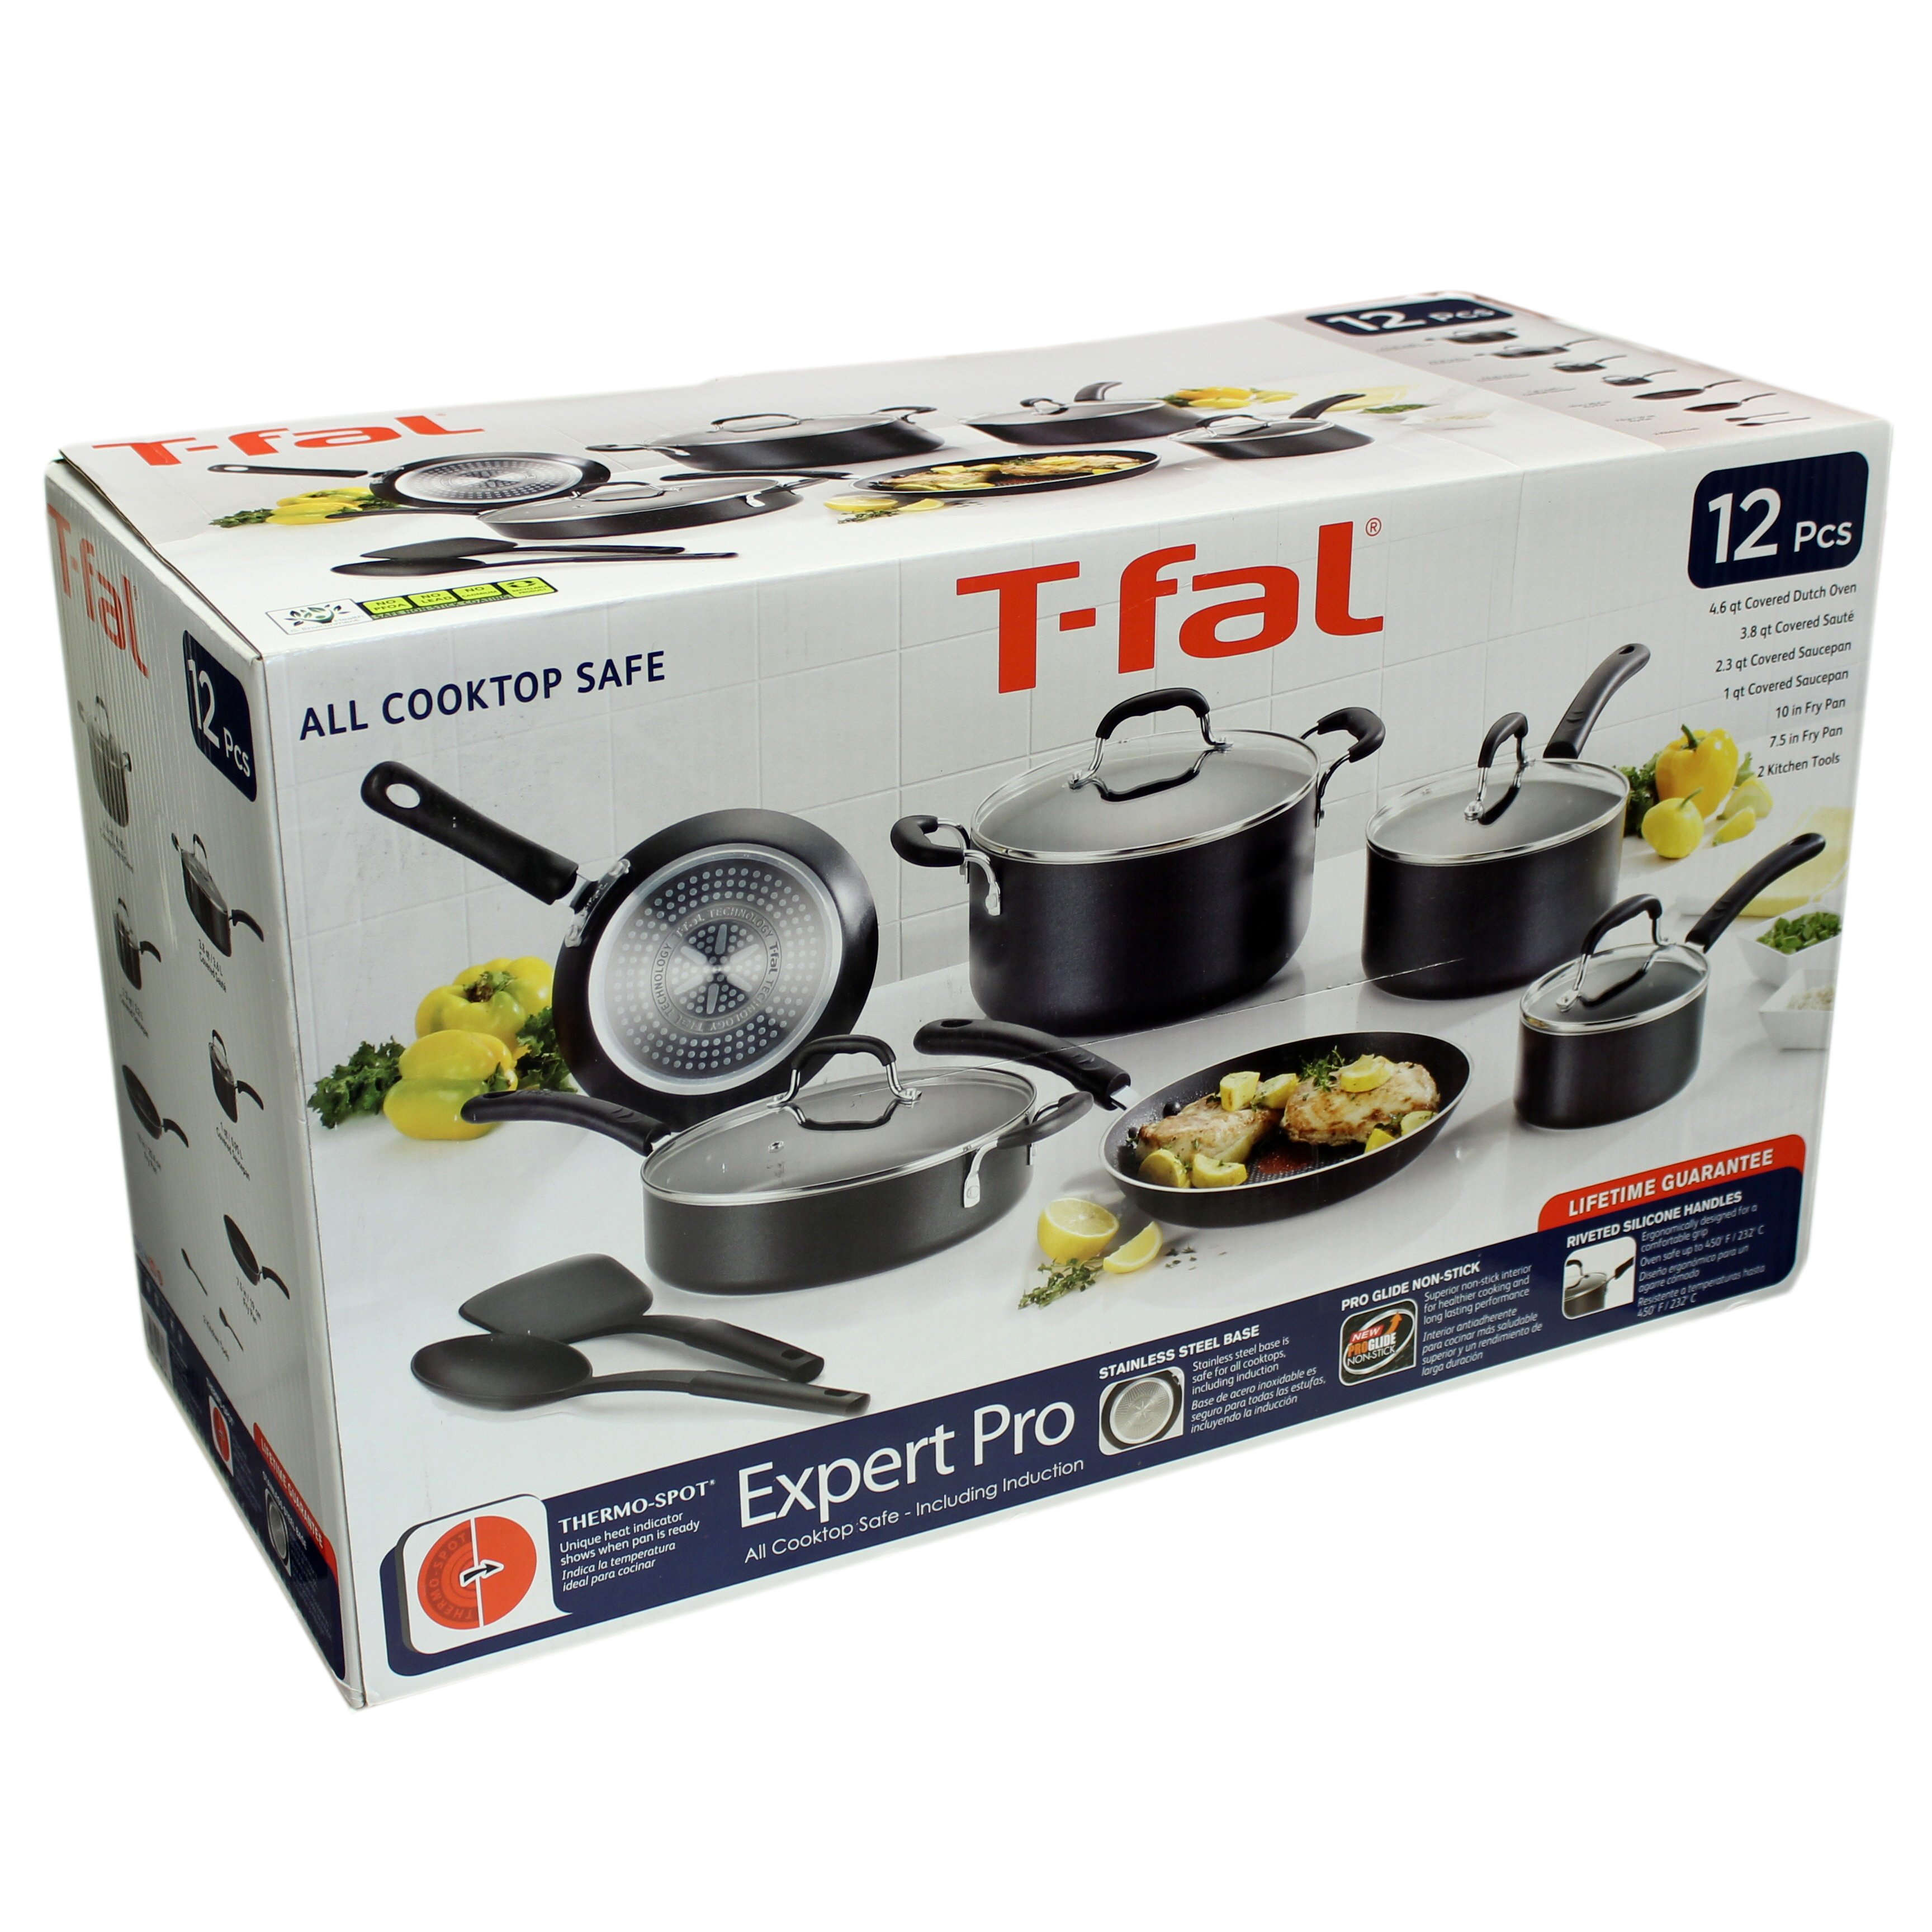 T-FAL T-fal Expert Pro, 12 Frypan Stainless Steel with Non-Stick